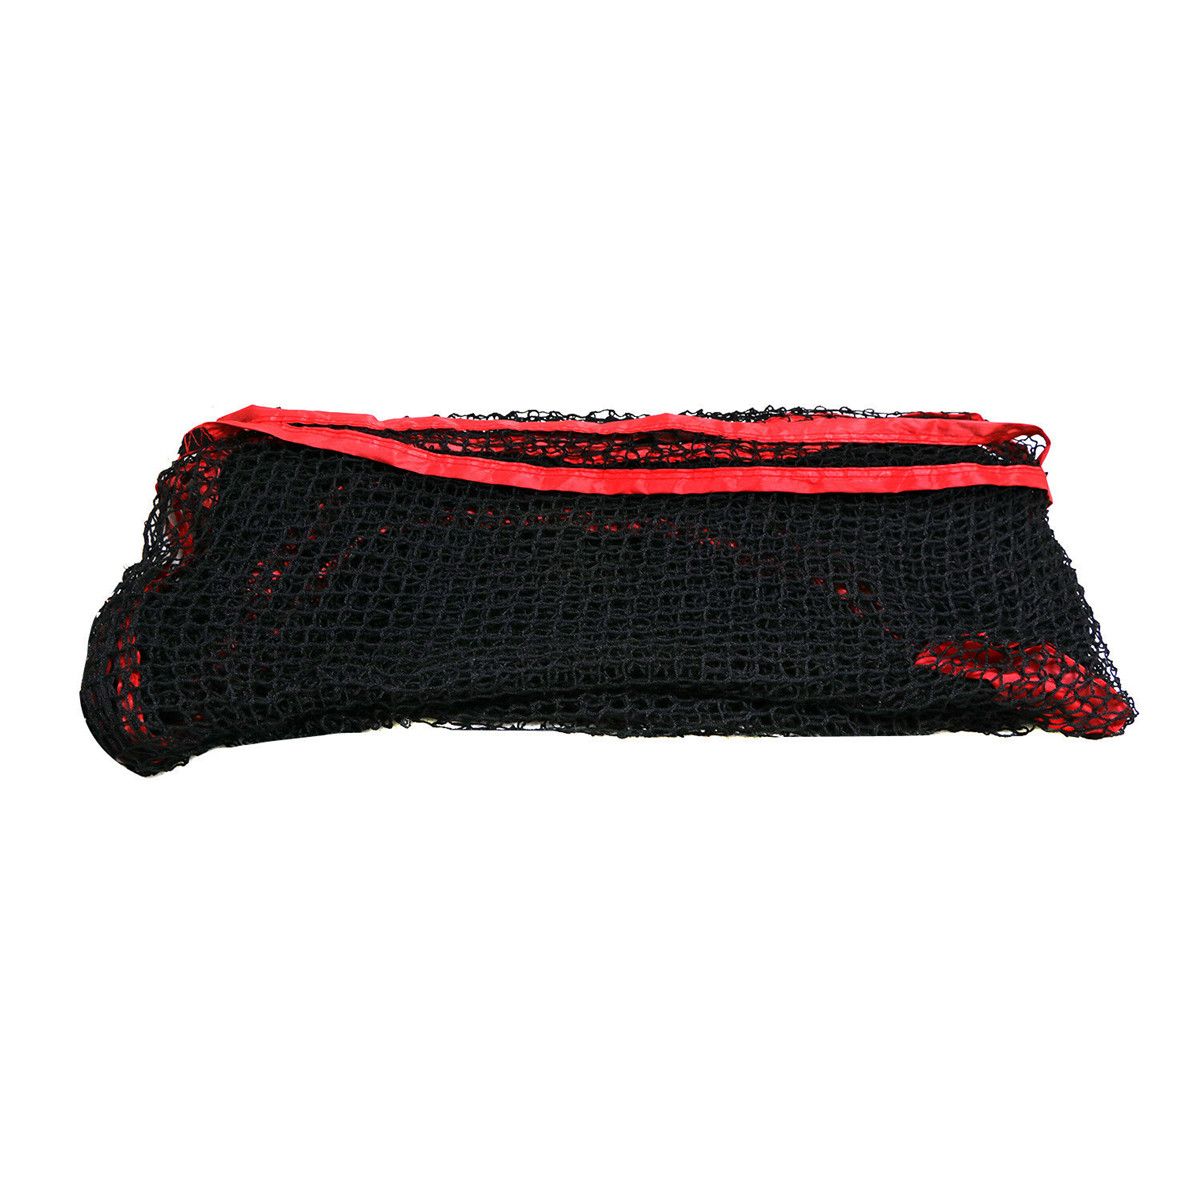 10-x-7FT-Foldable-Golf-Hitting-Practice-Net-Driving-Training-Aids-Carry-Bag-Storage-Net-1615904